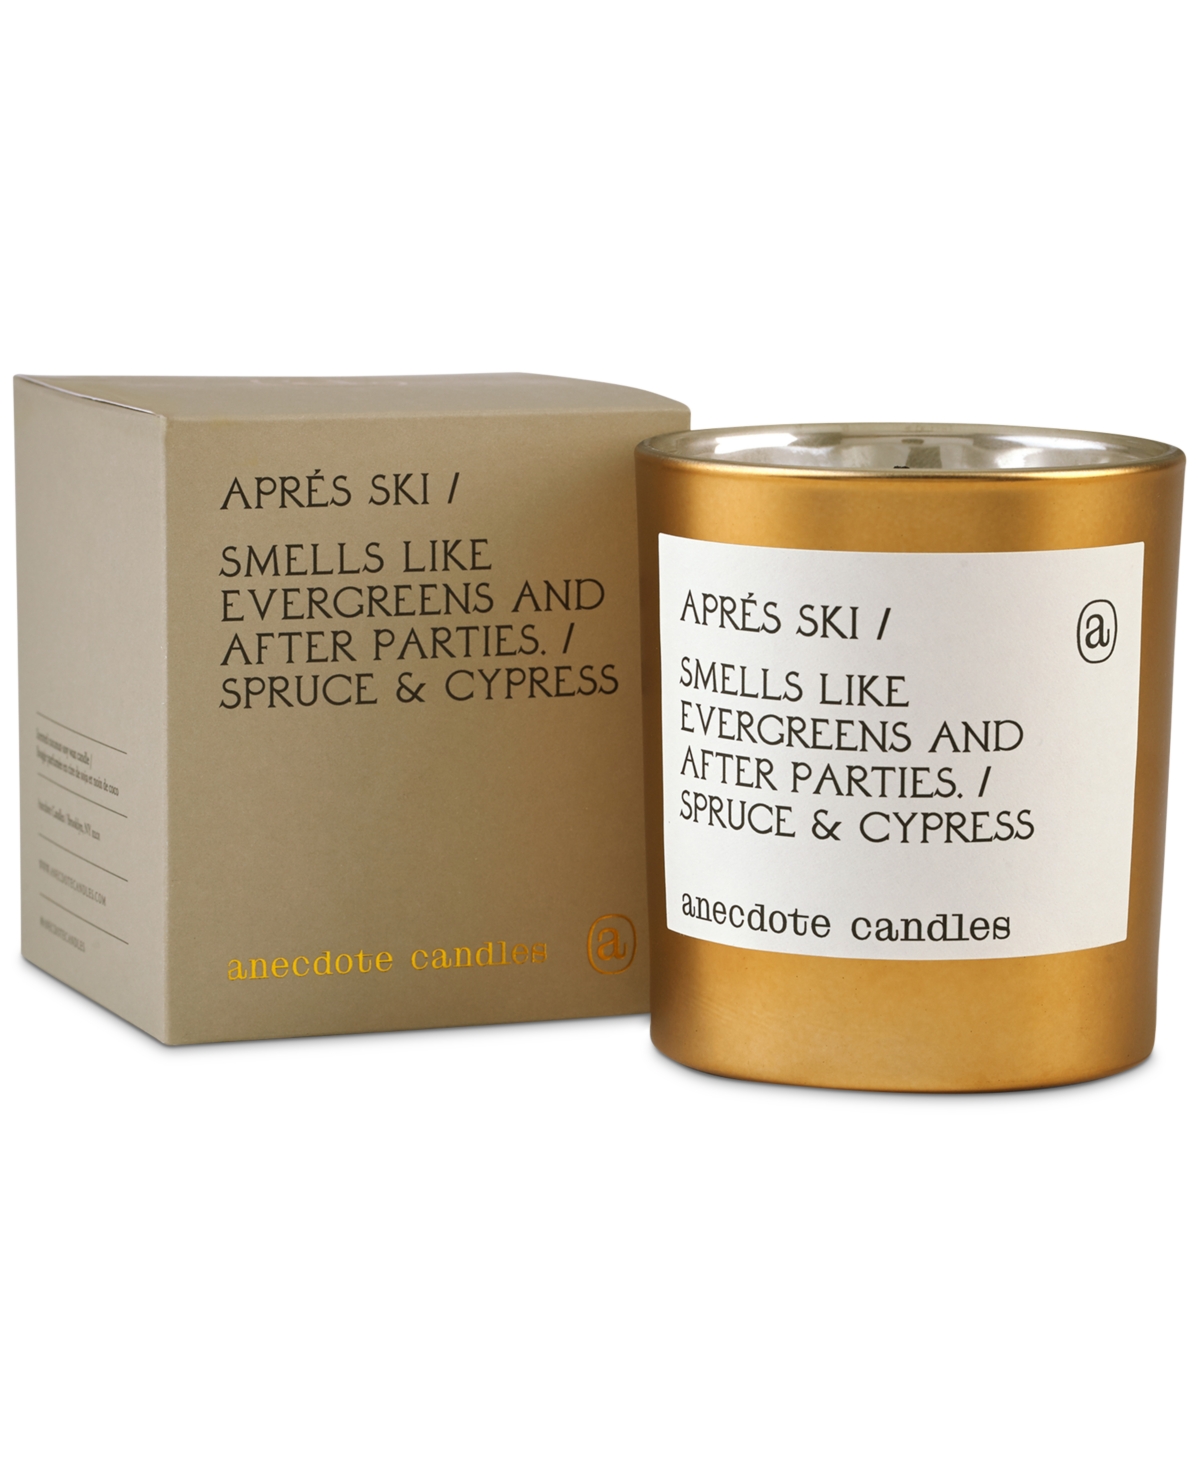 Apres Ski Smells Like Evergreens and After Parties Candle, 9-oz.